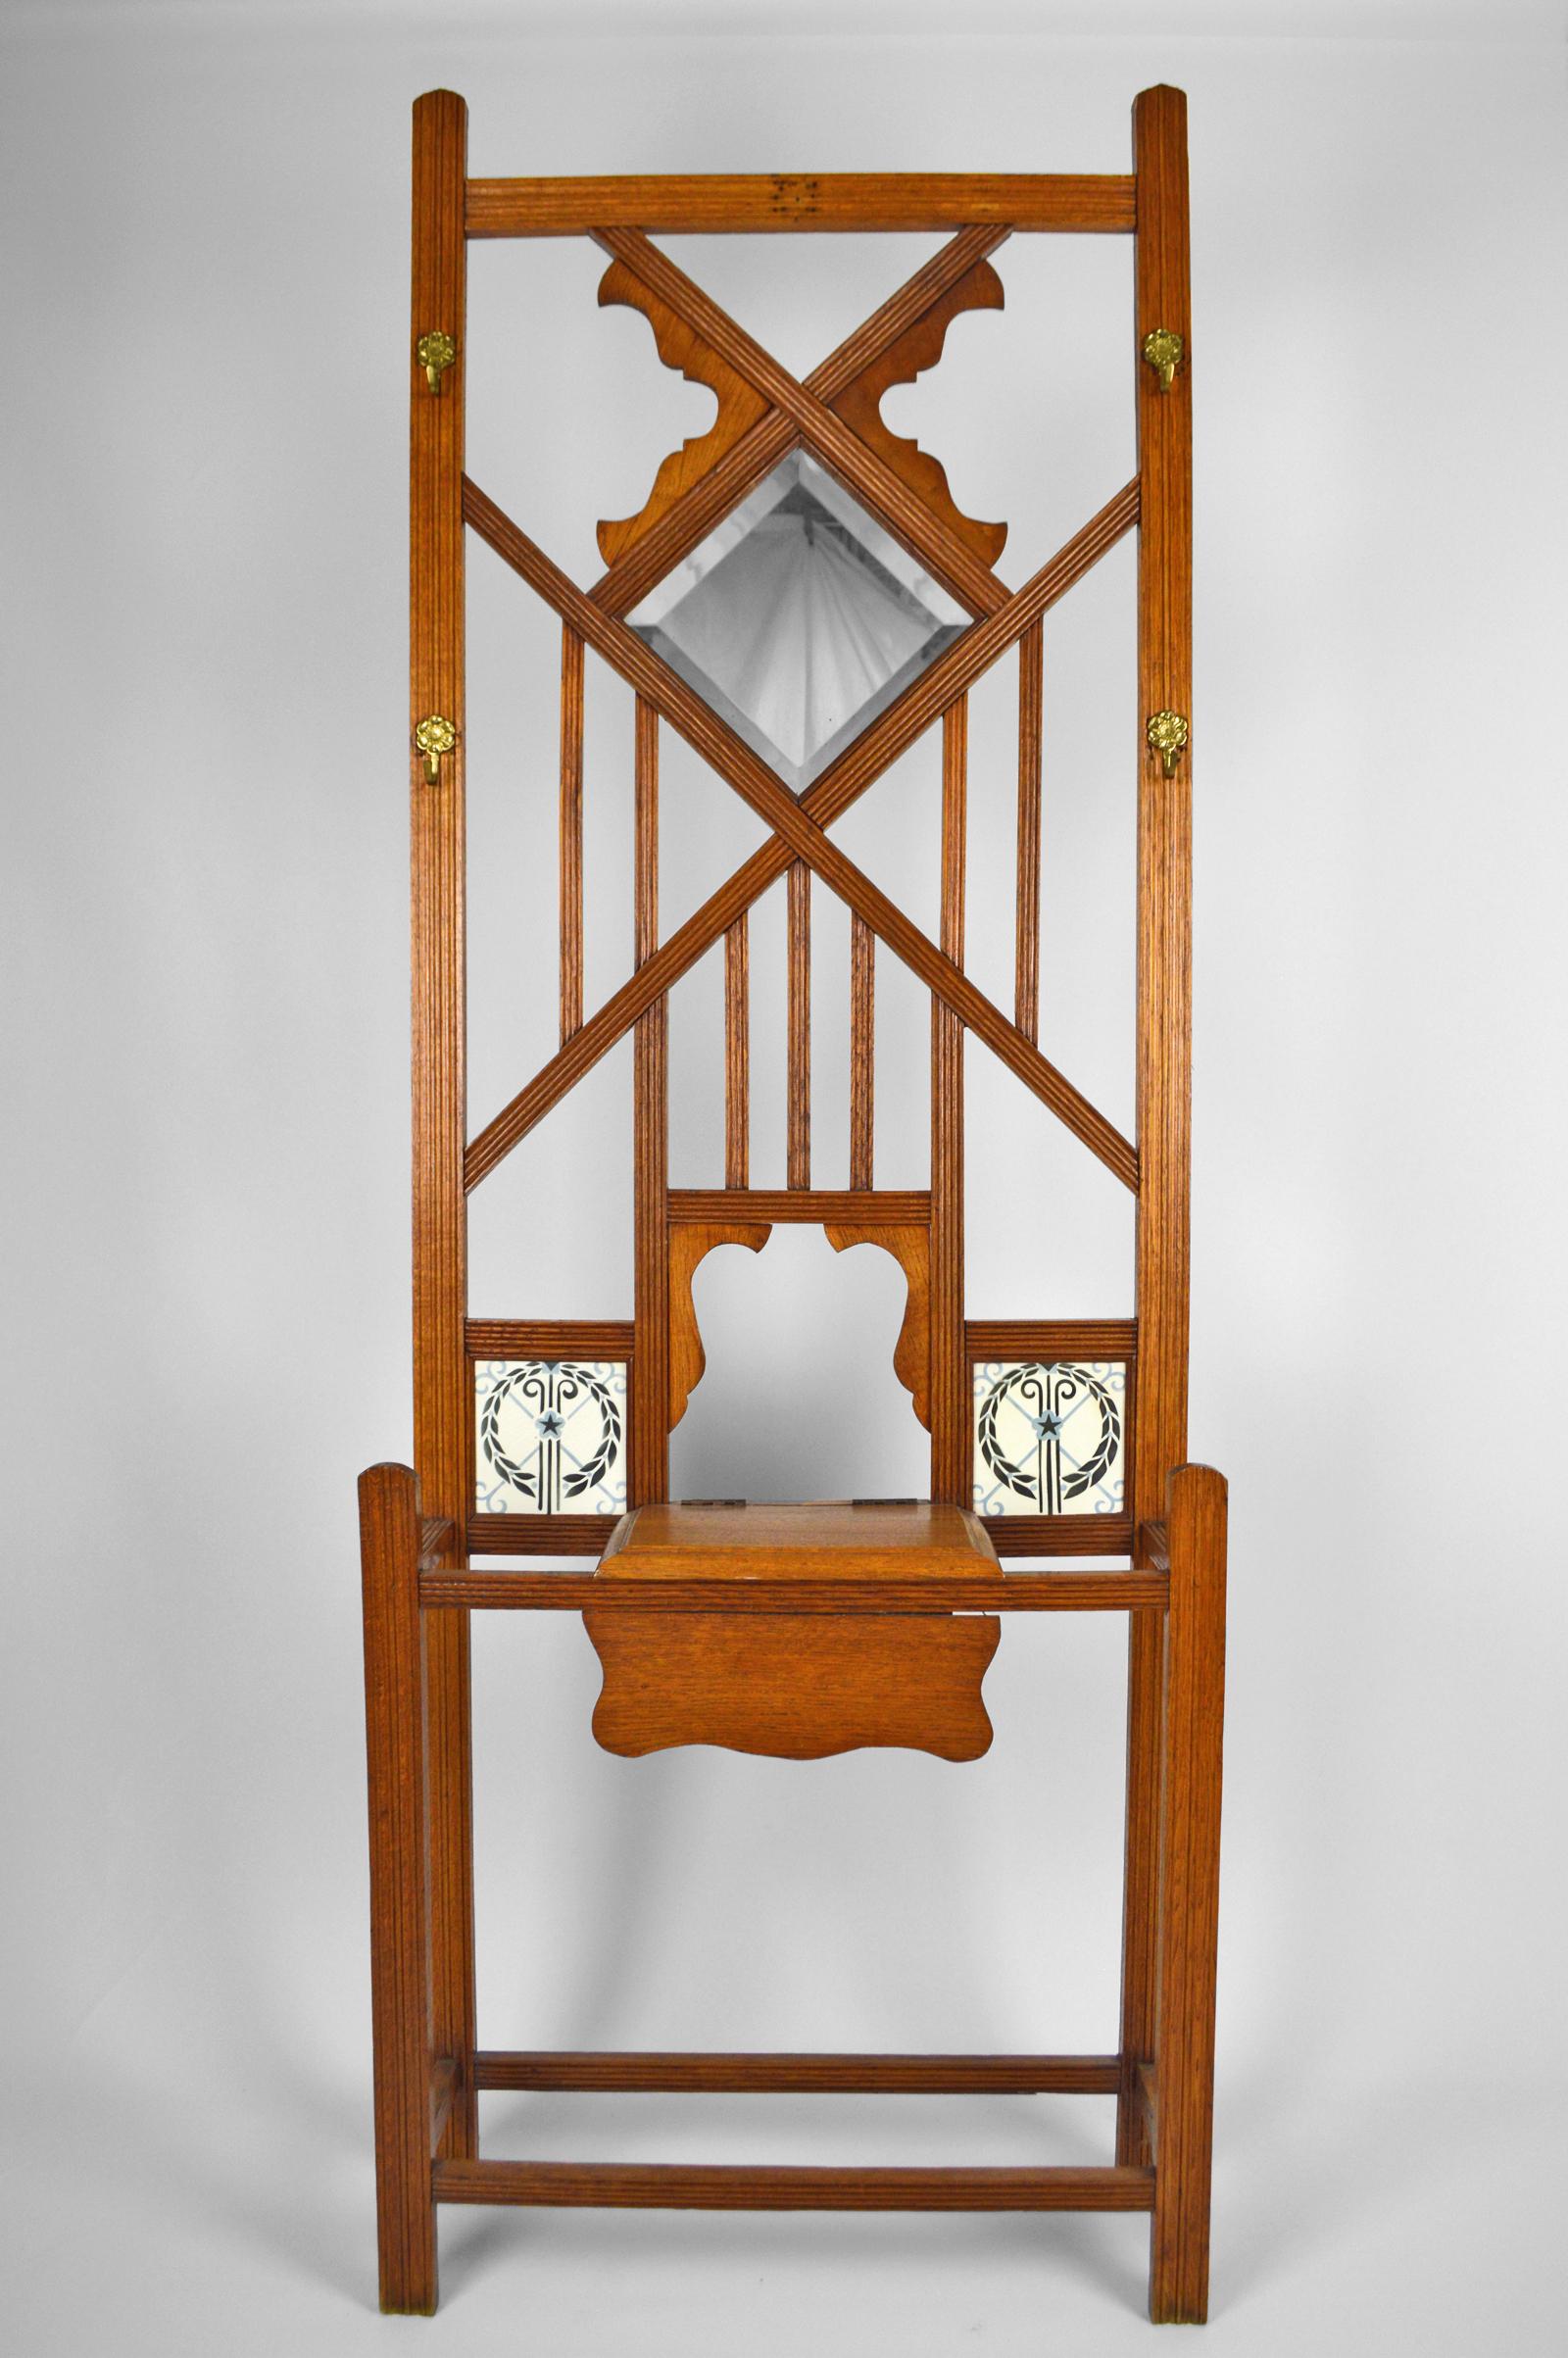 Pretty solid oak entrance cloakroom / Hall Stand / hat stand / coat stand decorated with a beveled mirror and 2 ceramic tiles.
Small storage box.
4 hooks.

Good condition.

Art Nouveau.
France, Circa